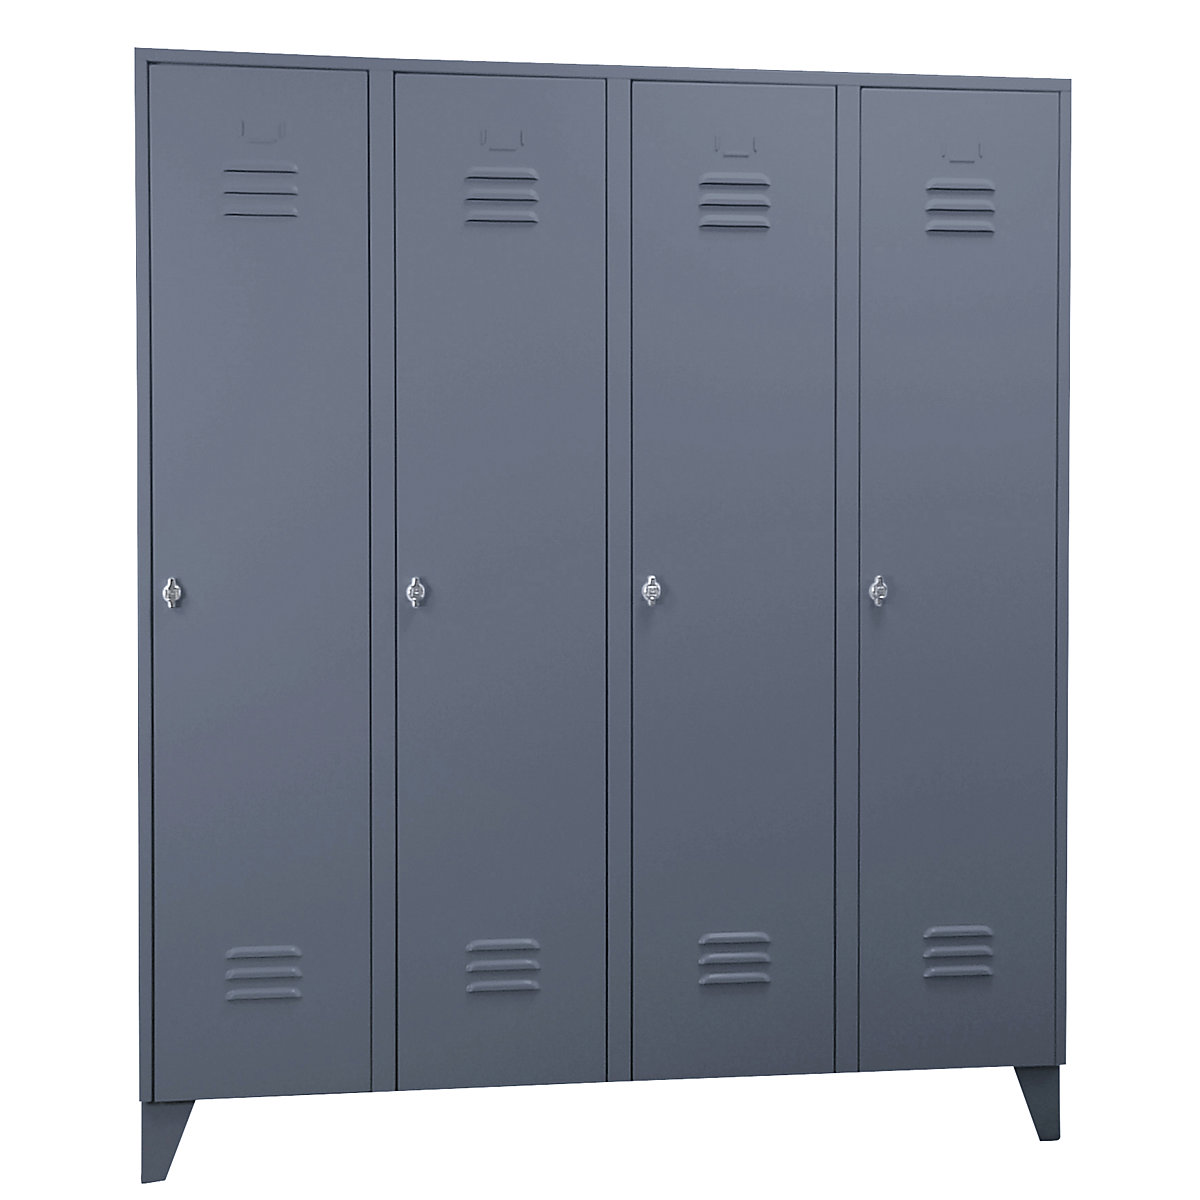 Steel locker with stud feet – Wolf, full height compartments, solid doors, compartment width 400 mm, 4 compartments, blue grey-49